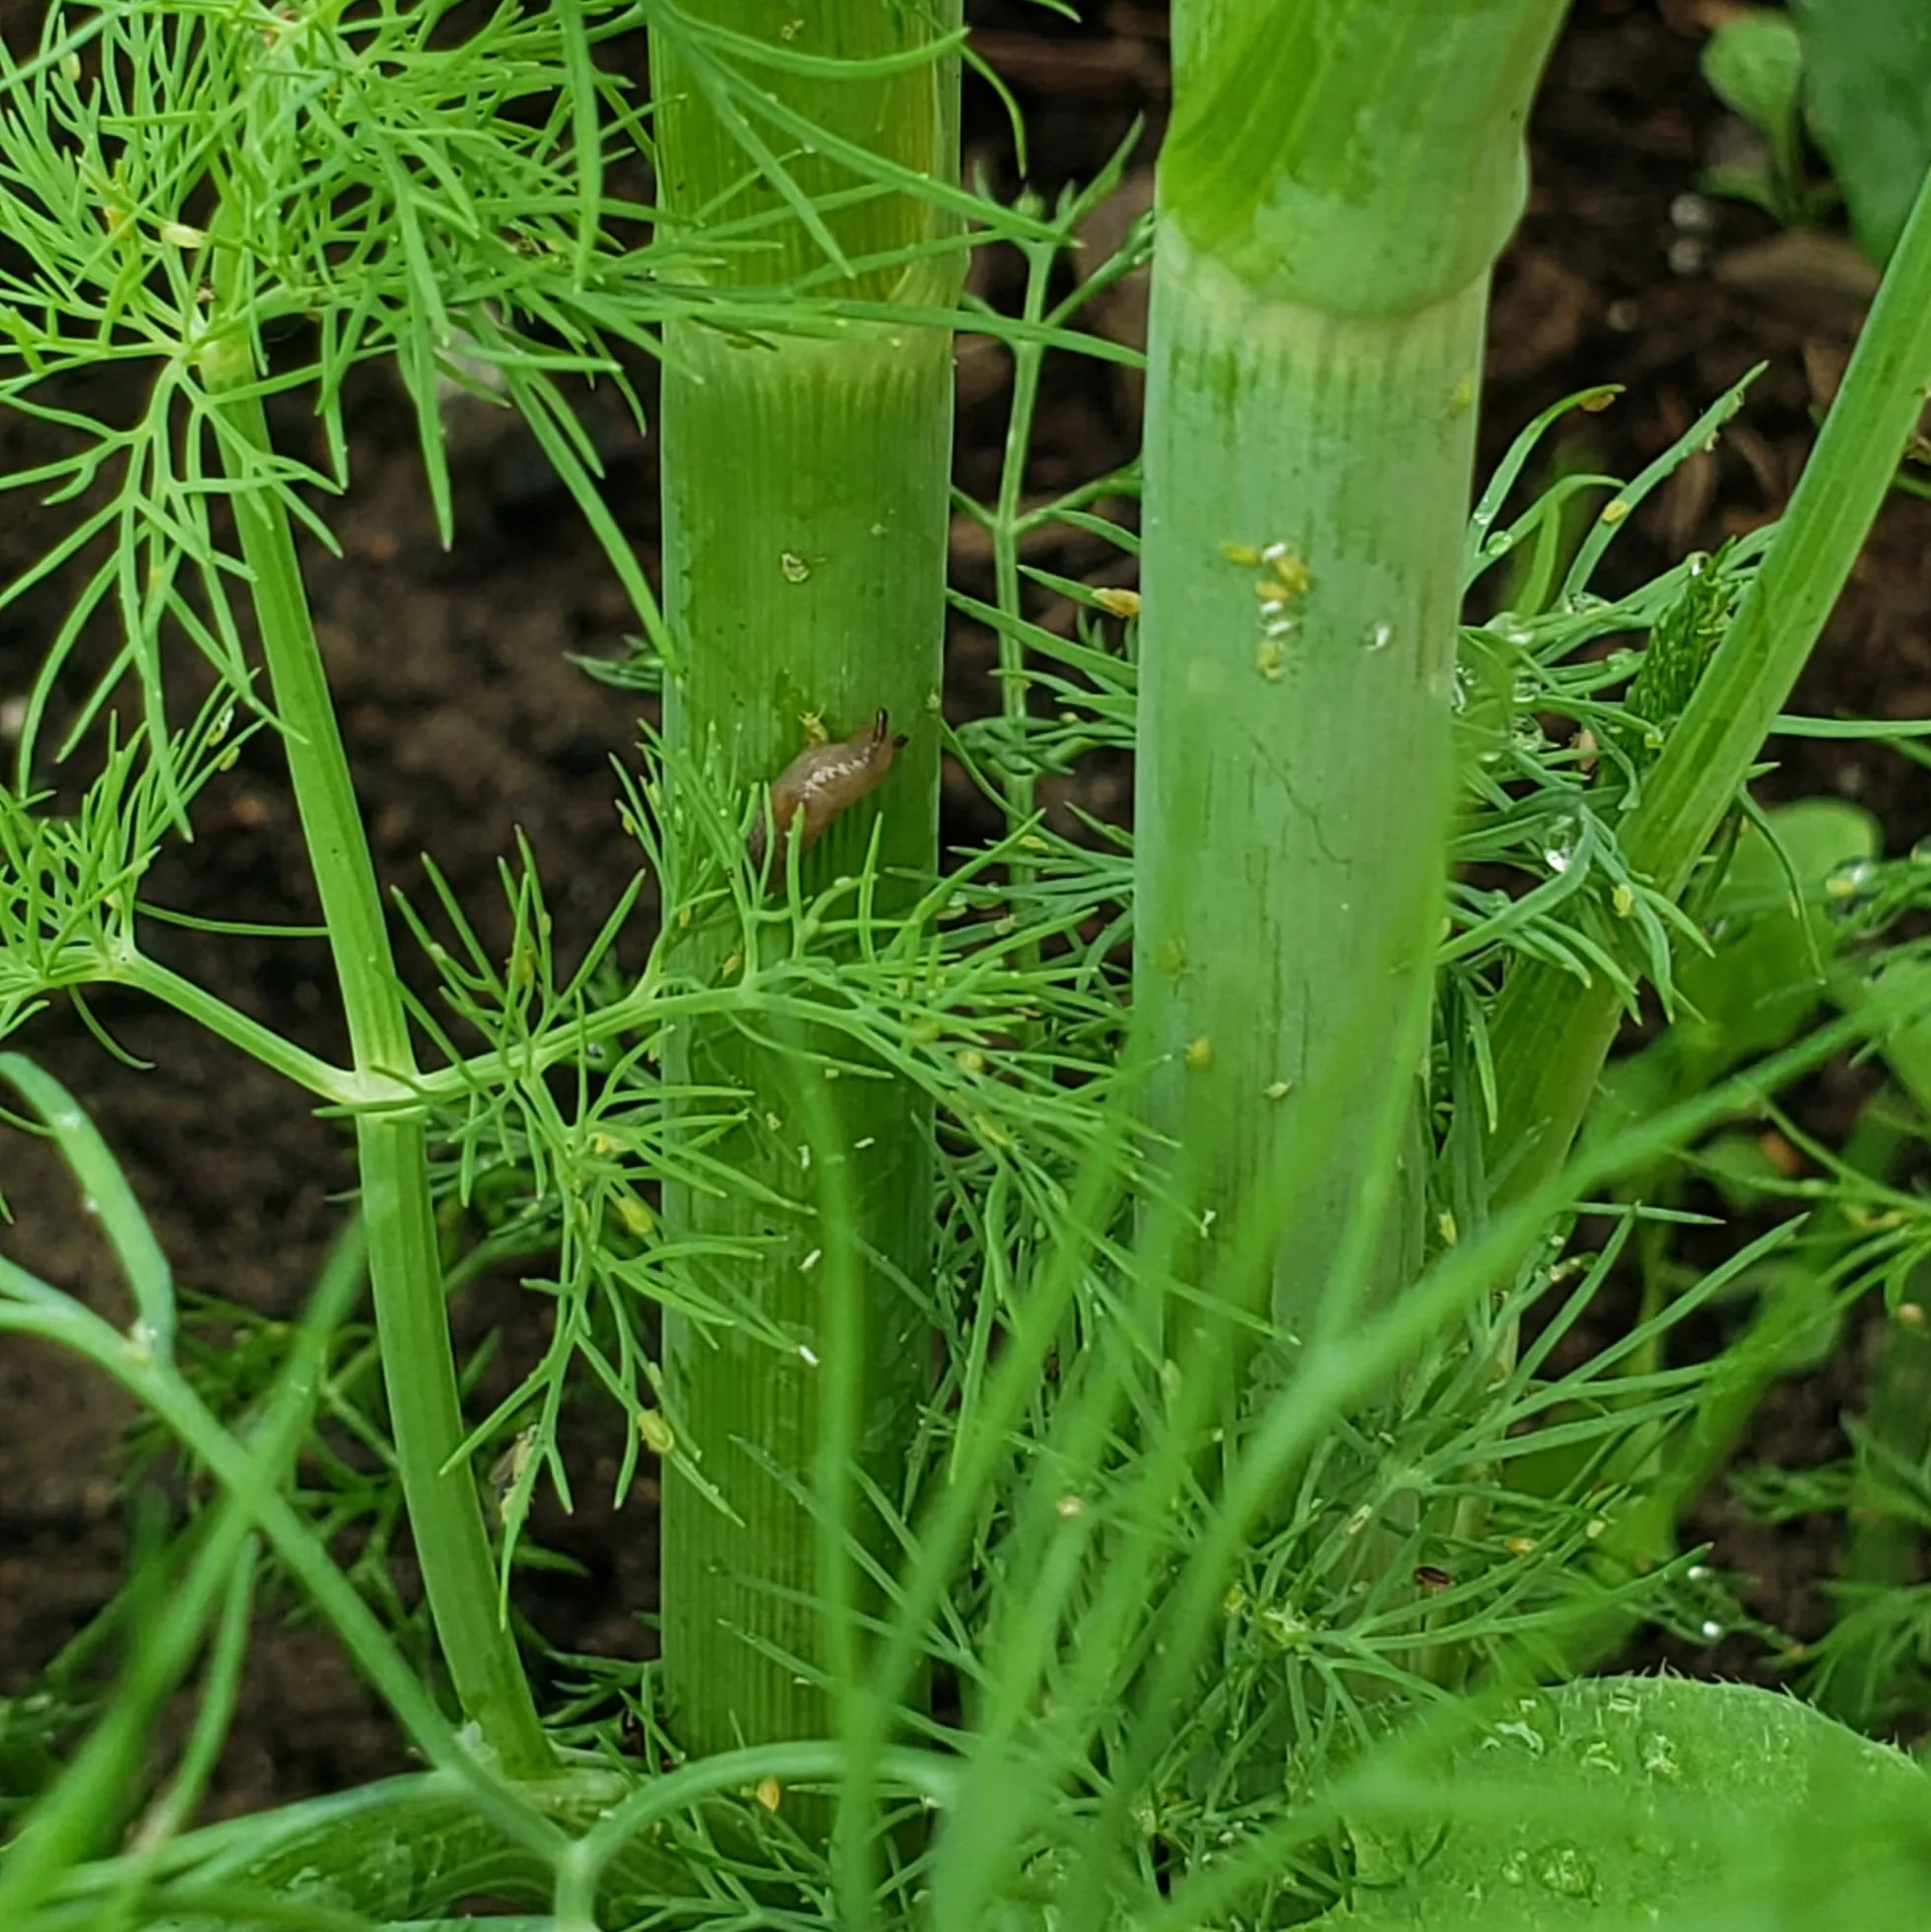 Slugs and aphids on the stalk of a dill plant